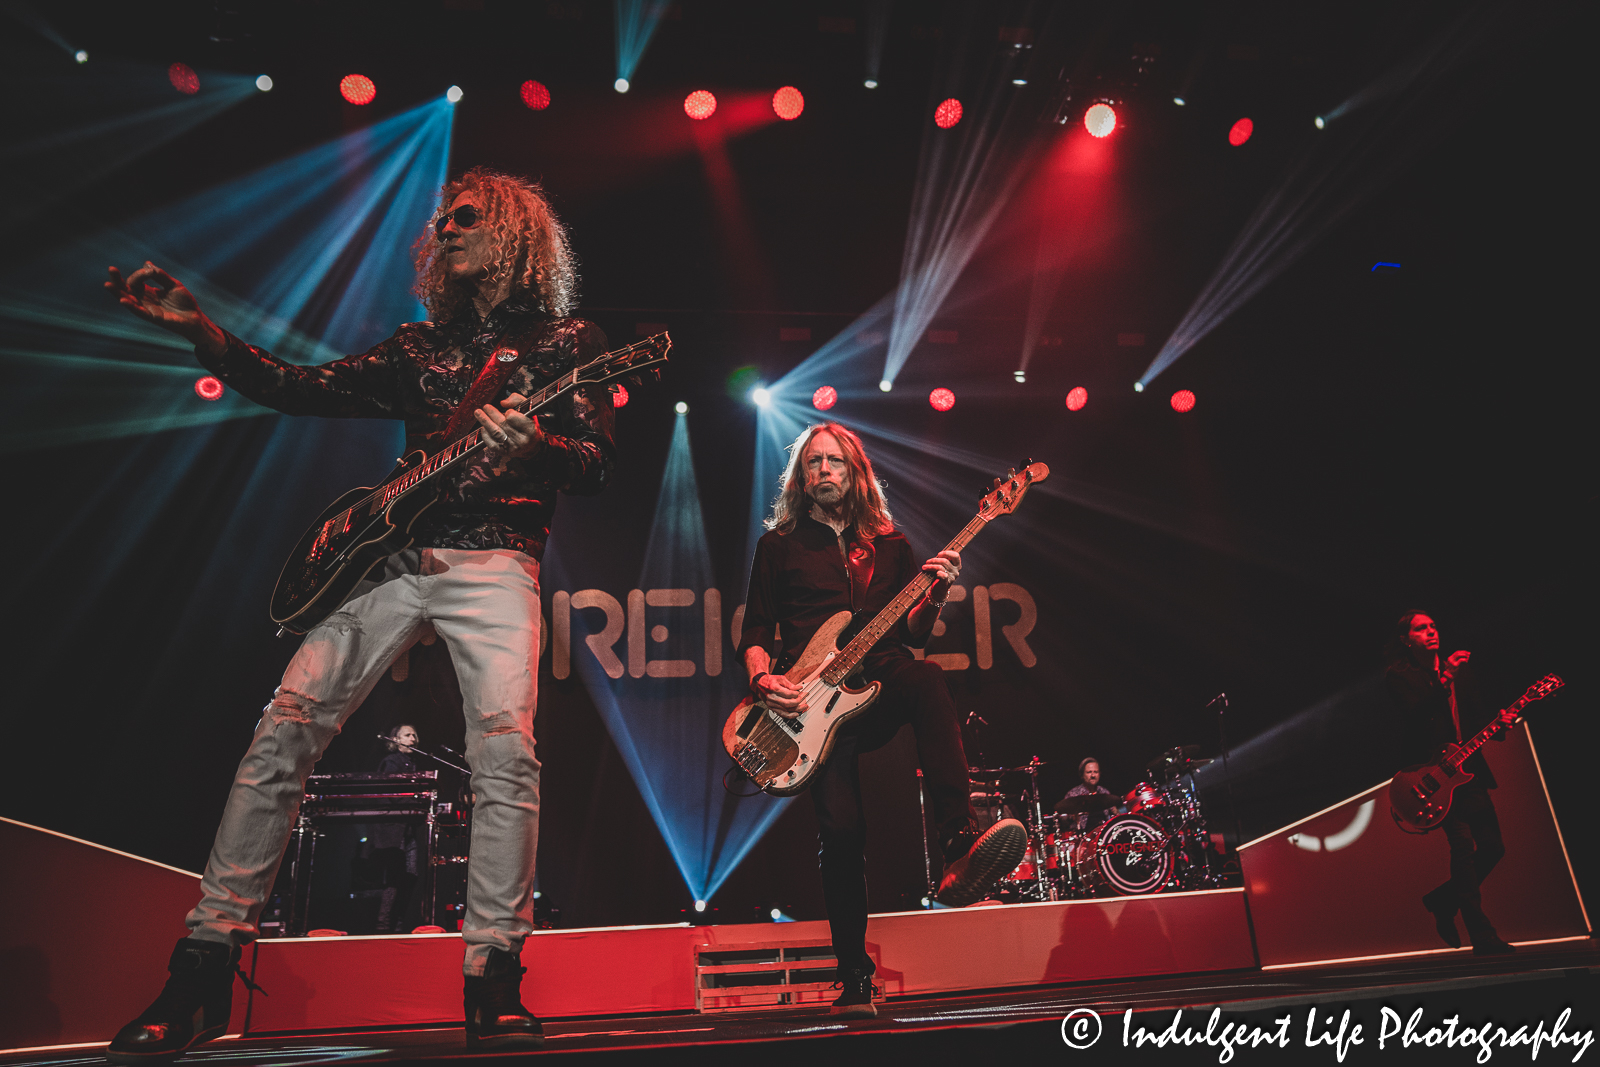 Foreigner band members Bruce Watson, Jeff Pilson, Luis Maldonado, Michael Bluestein and Chris Frazier performing together at Stormont Vail Events Center in Topeka, KS on May 2, 2023.